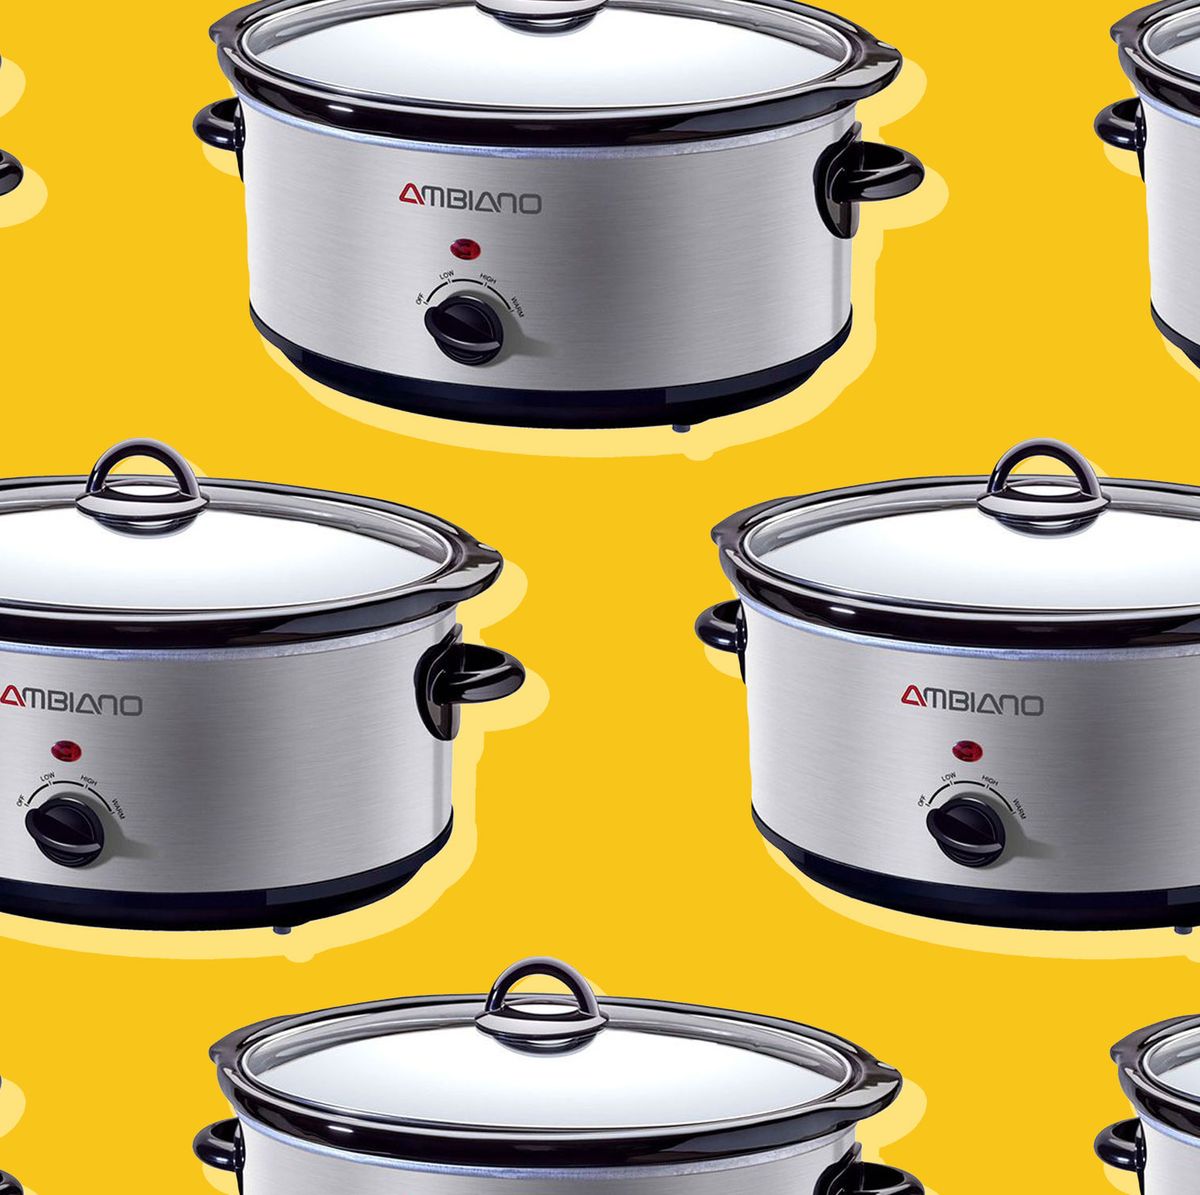 Crockpot  sale: Save up to $15 on slow cookers and food